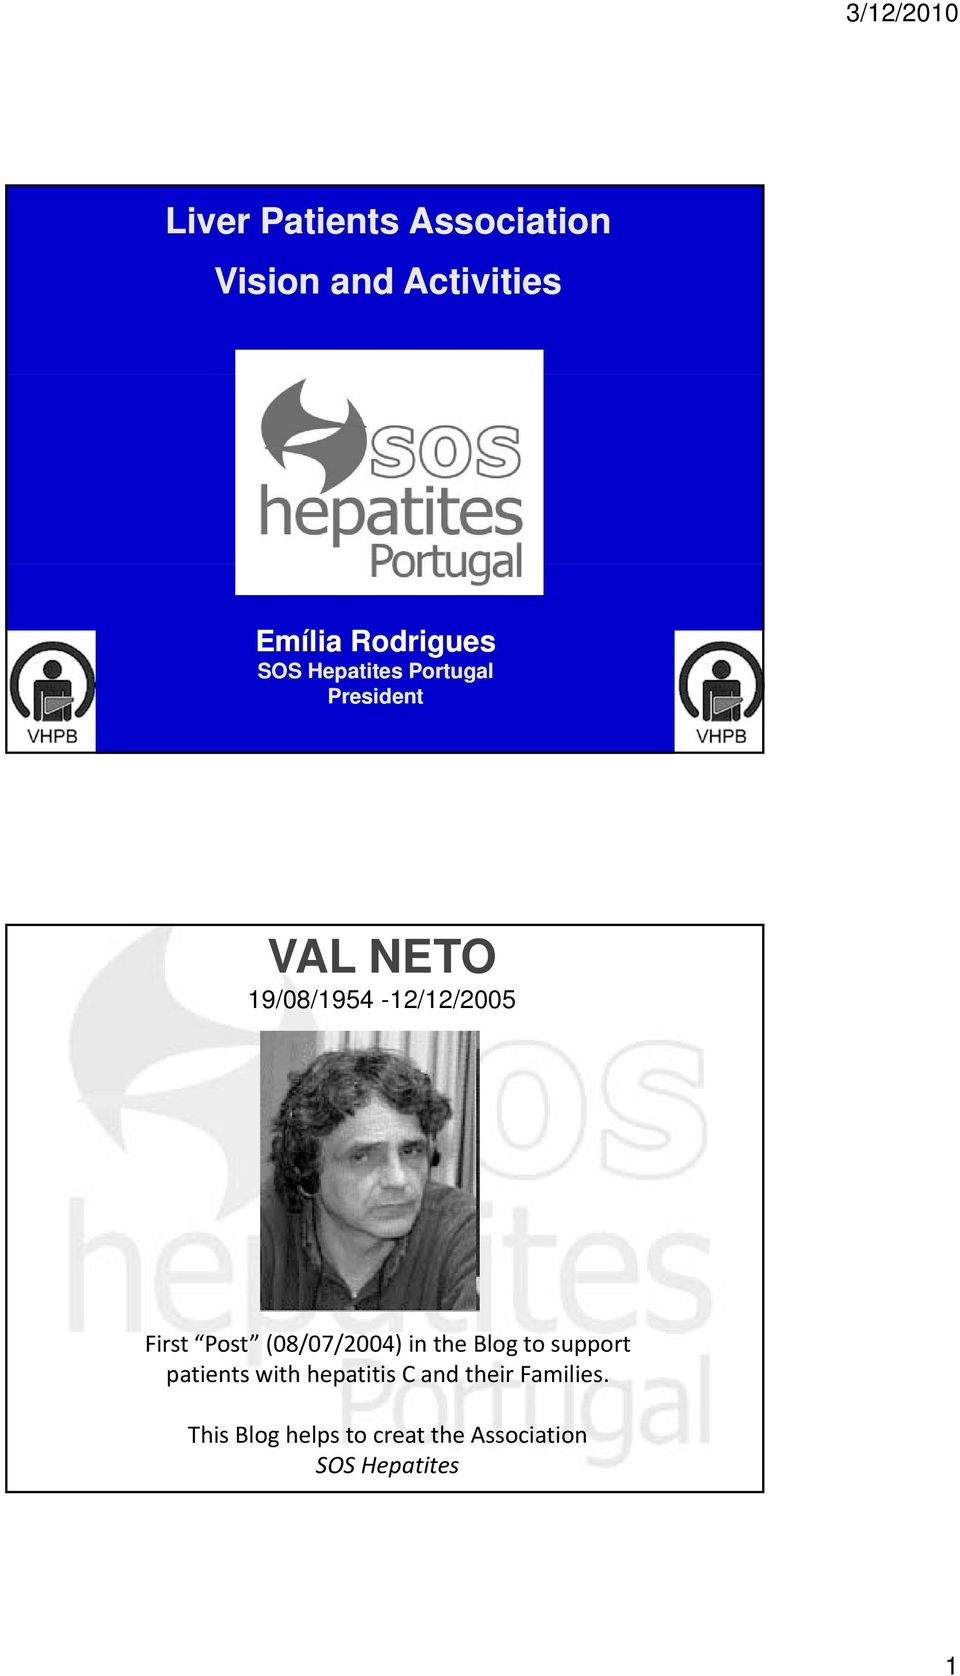 Post (08/07/2004) in the Blog to support patients with hepatitis C